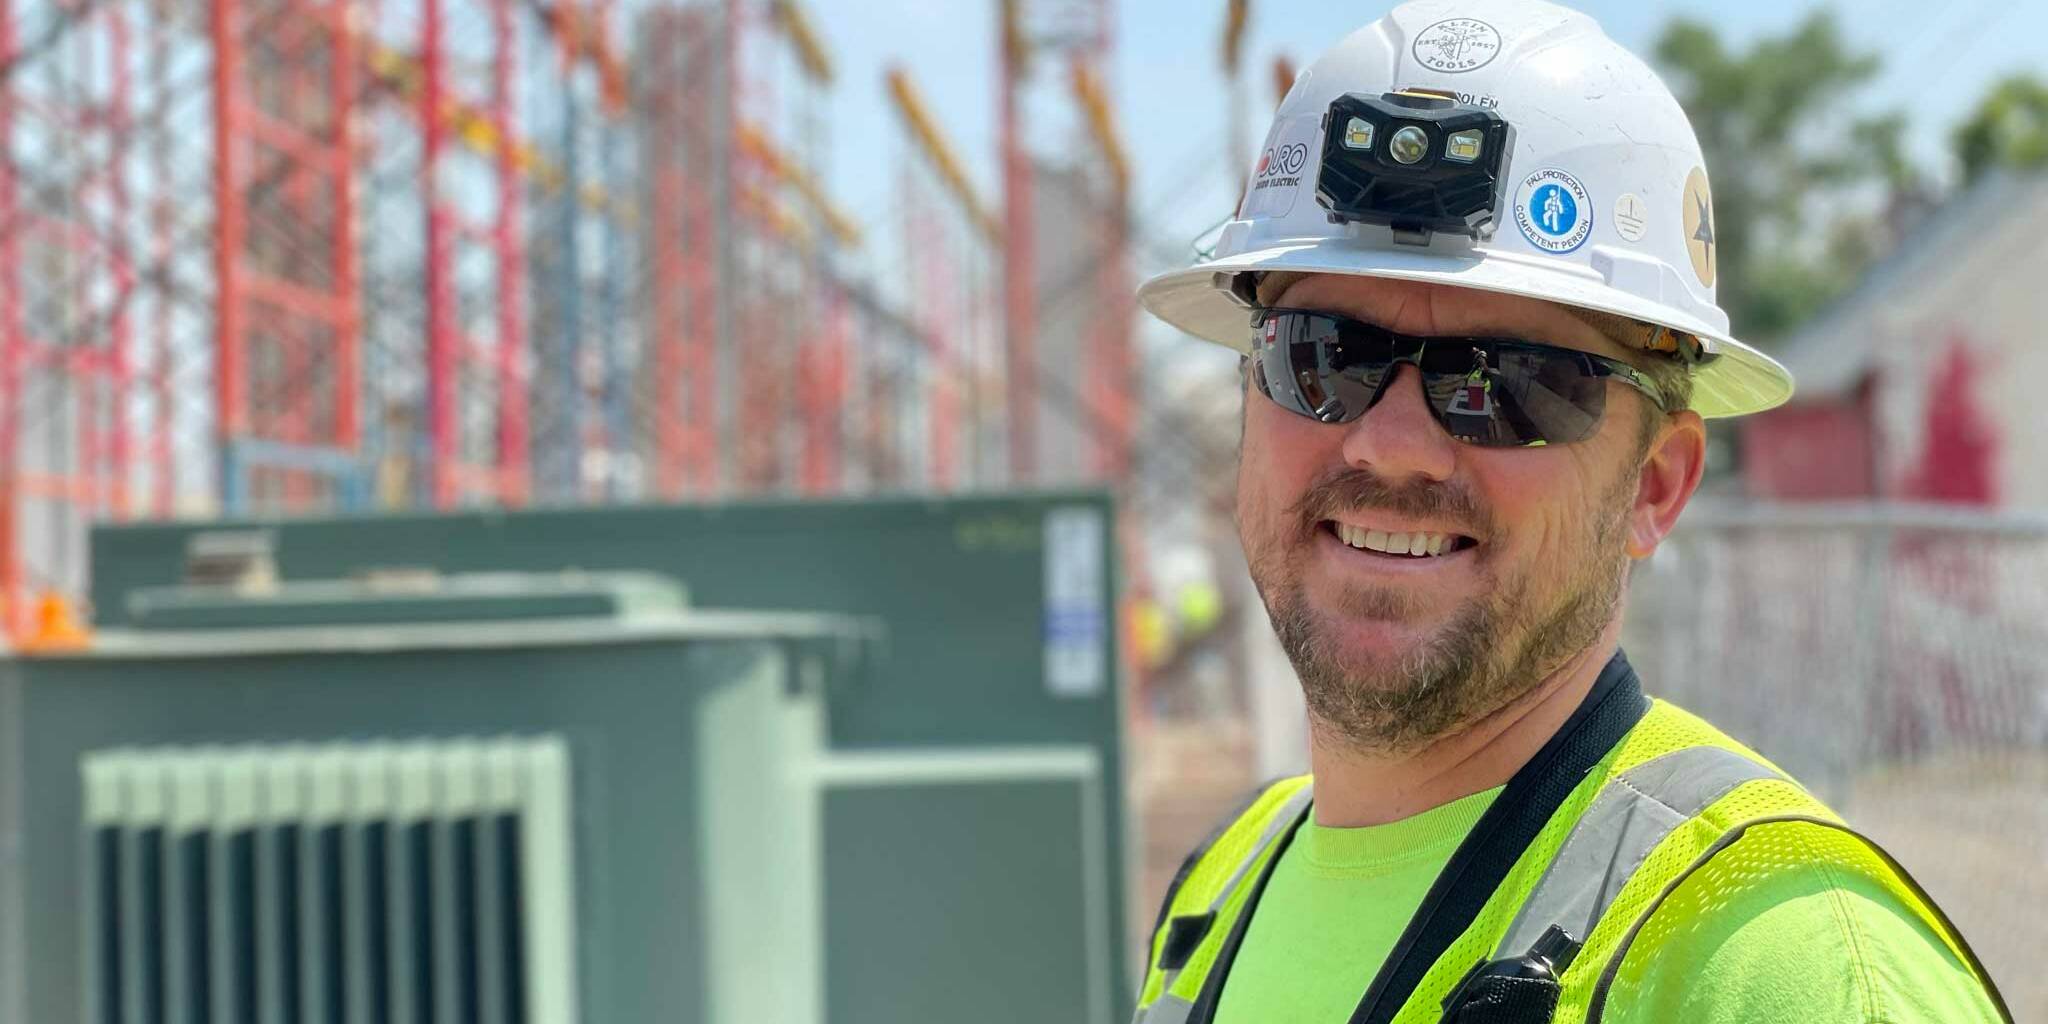 Construction worker smiling at camera